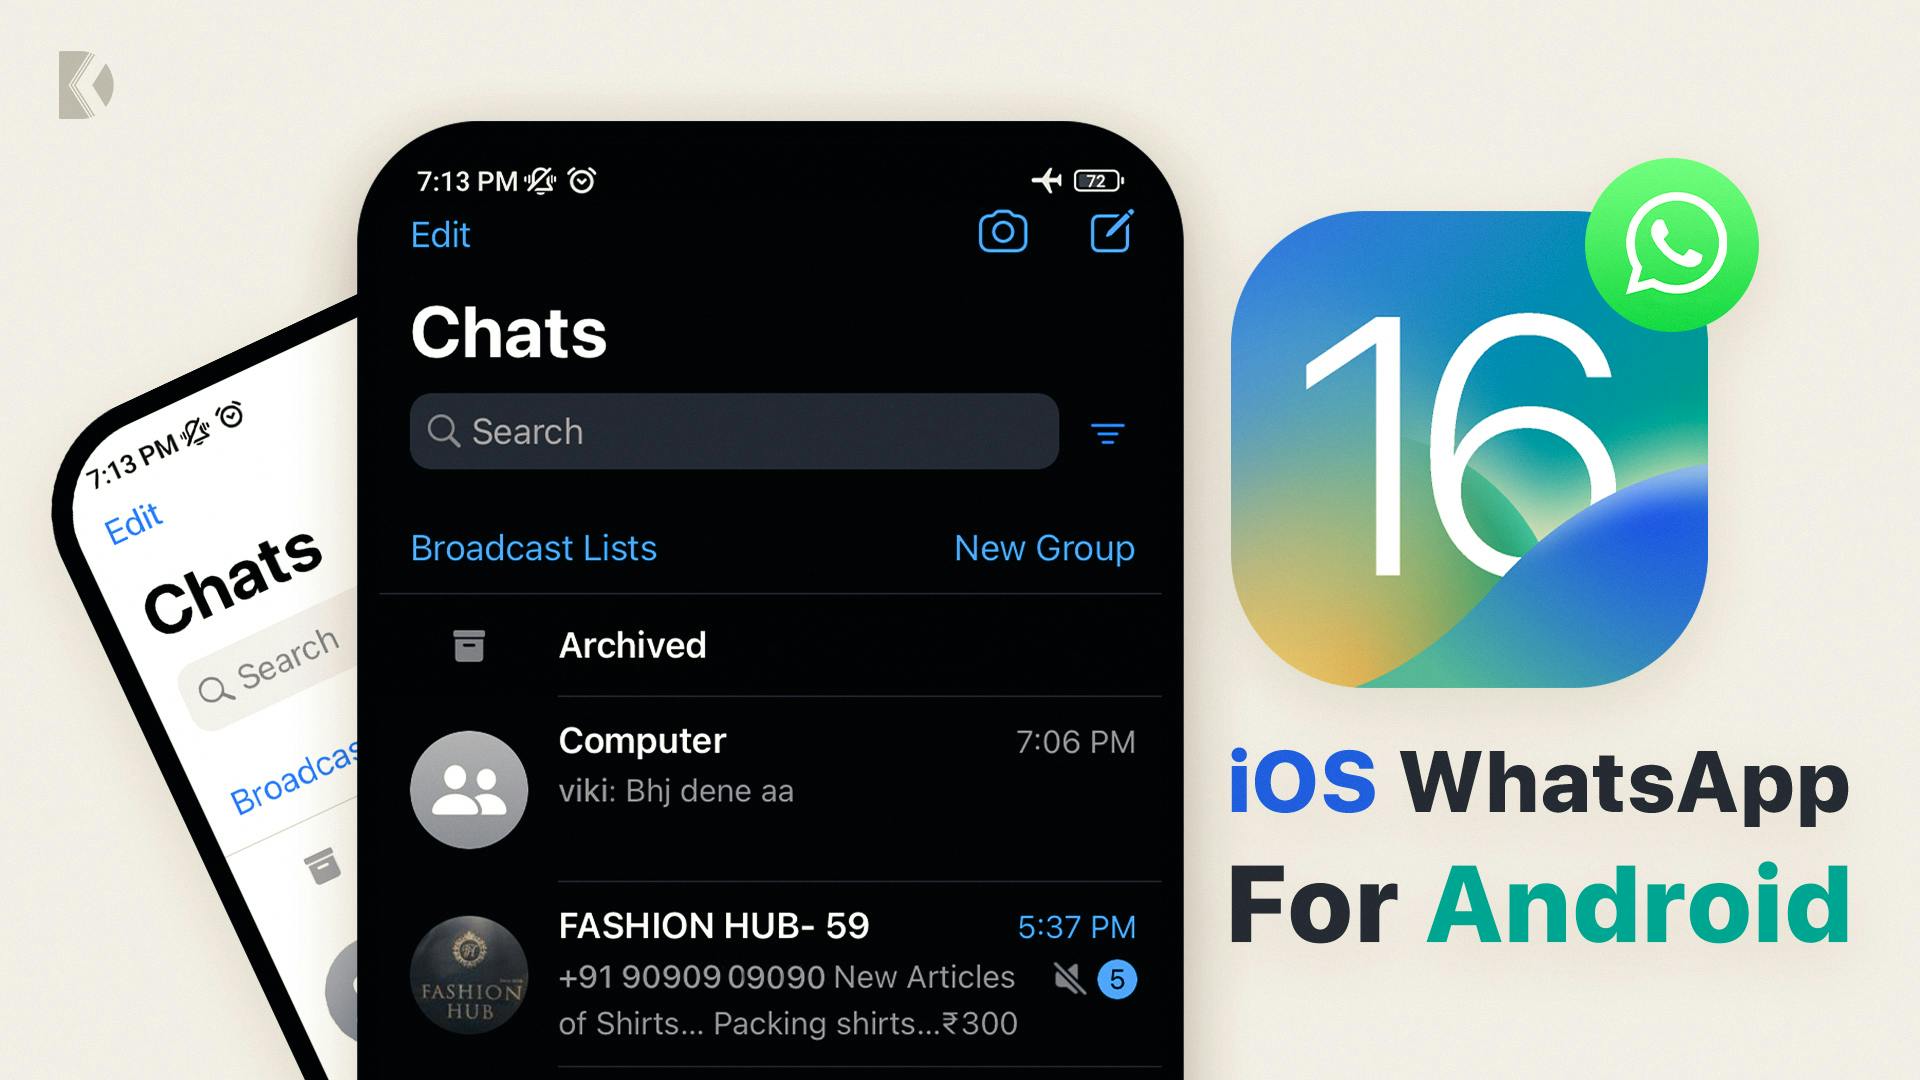 iOS WhatsApp On Any Android phone